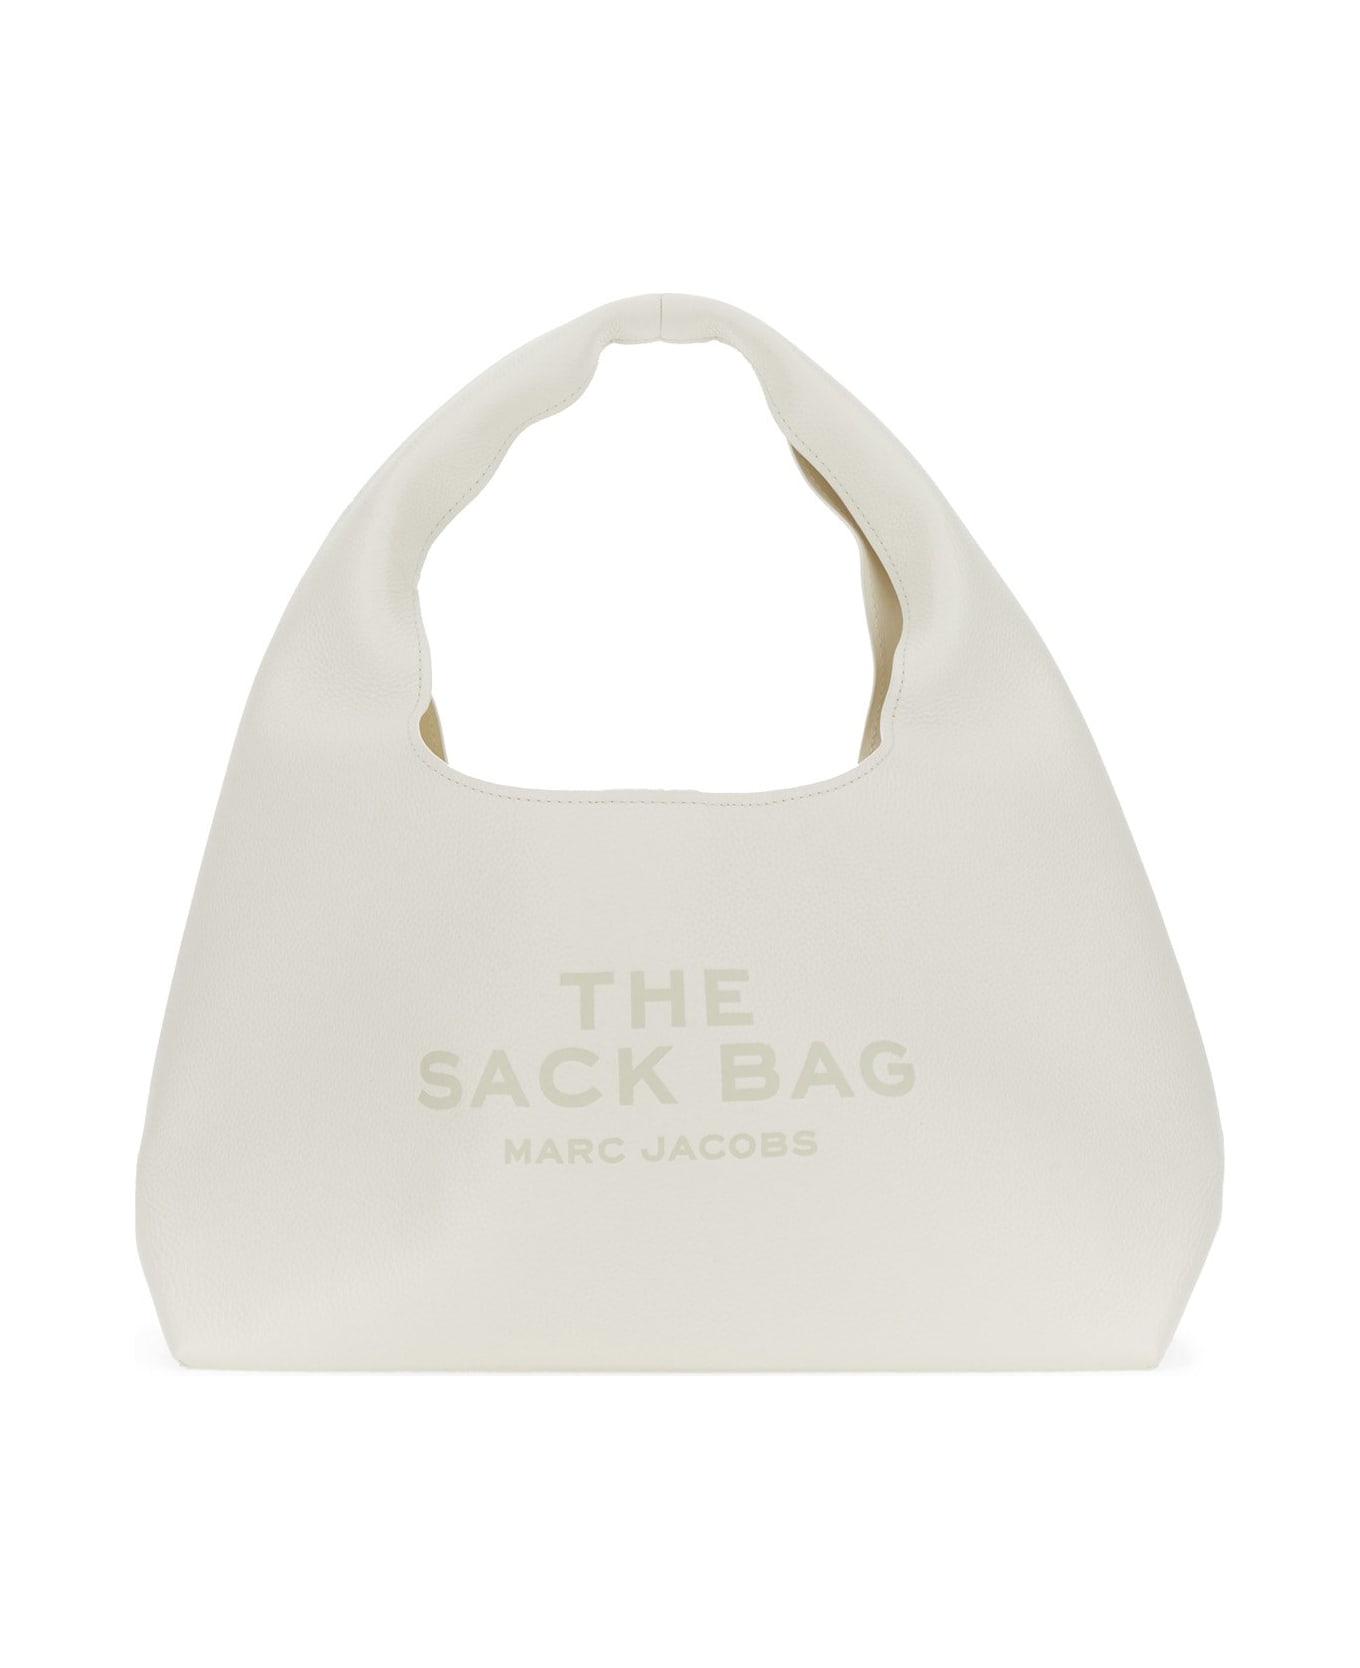 Marc Jacobs The Sack Bag - White トートバッグ